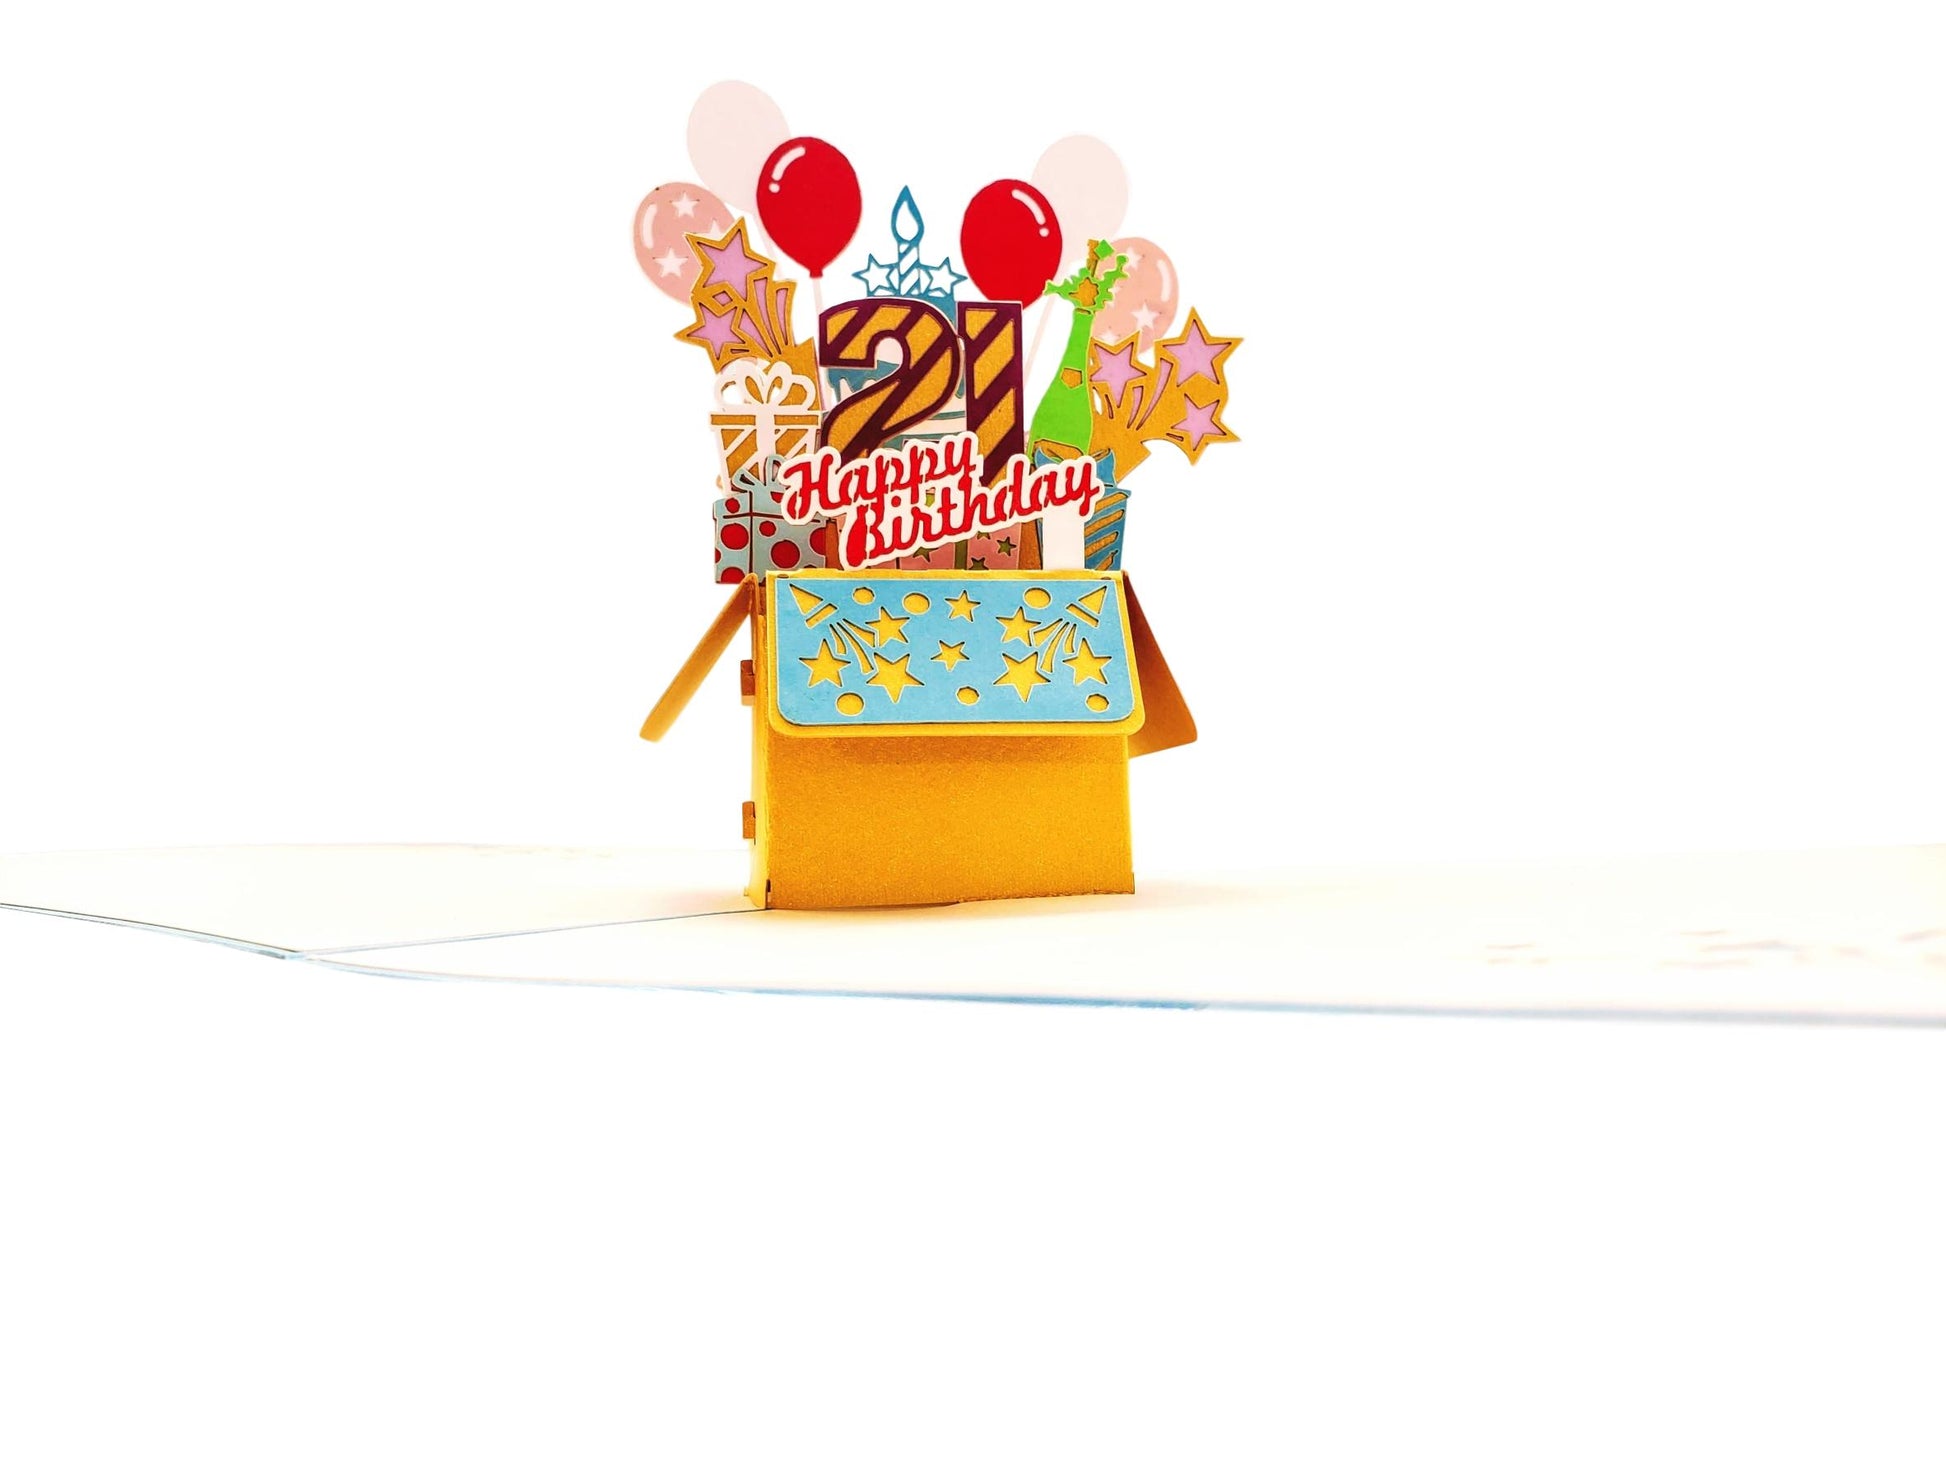 21st Blue Party Box 3D Pop Up Greeting Card - Awesome - Balloons - best wishes - Birthday - Brighten - iGifts And Cards